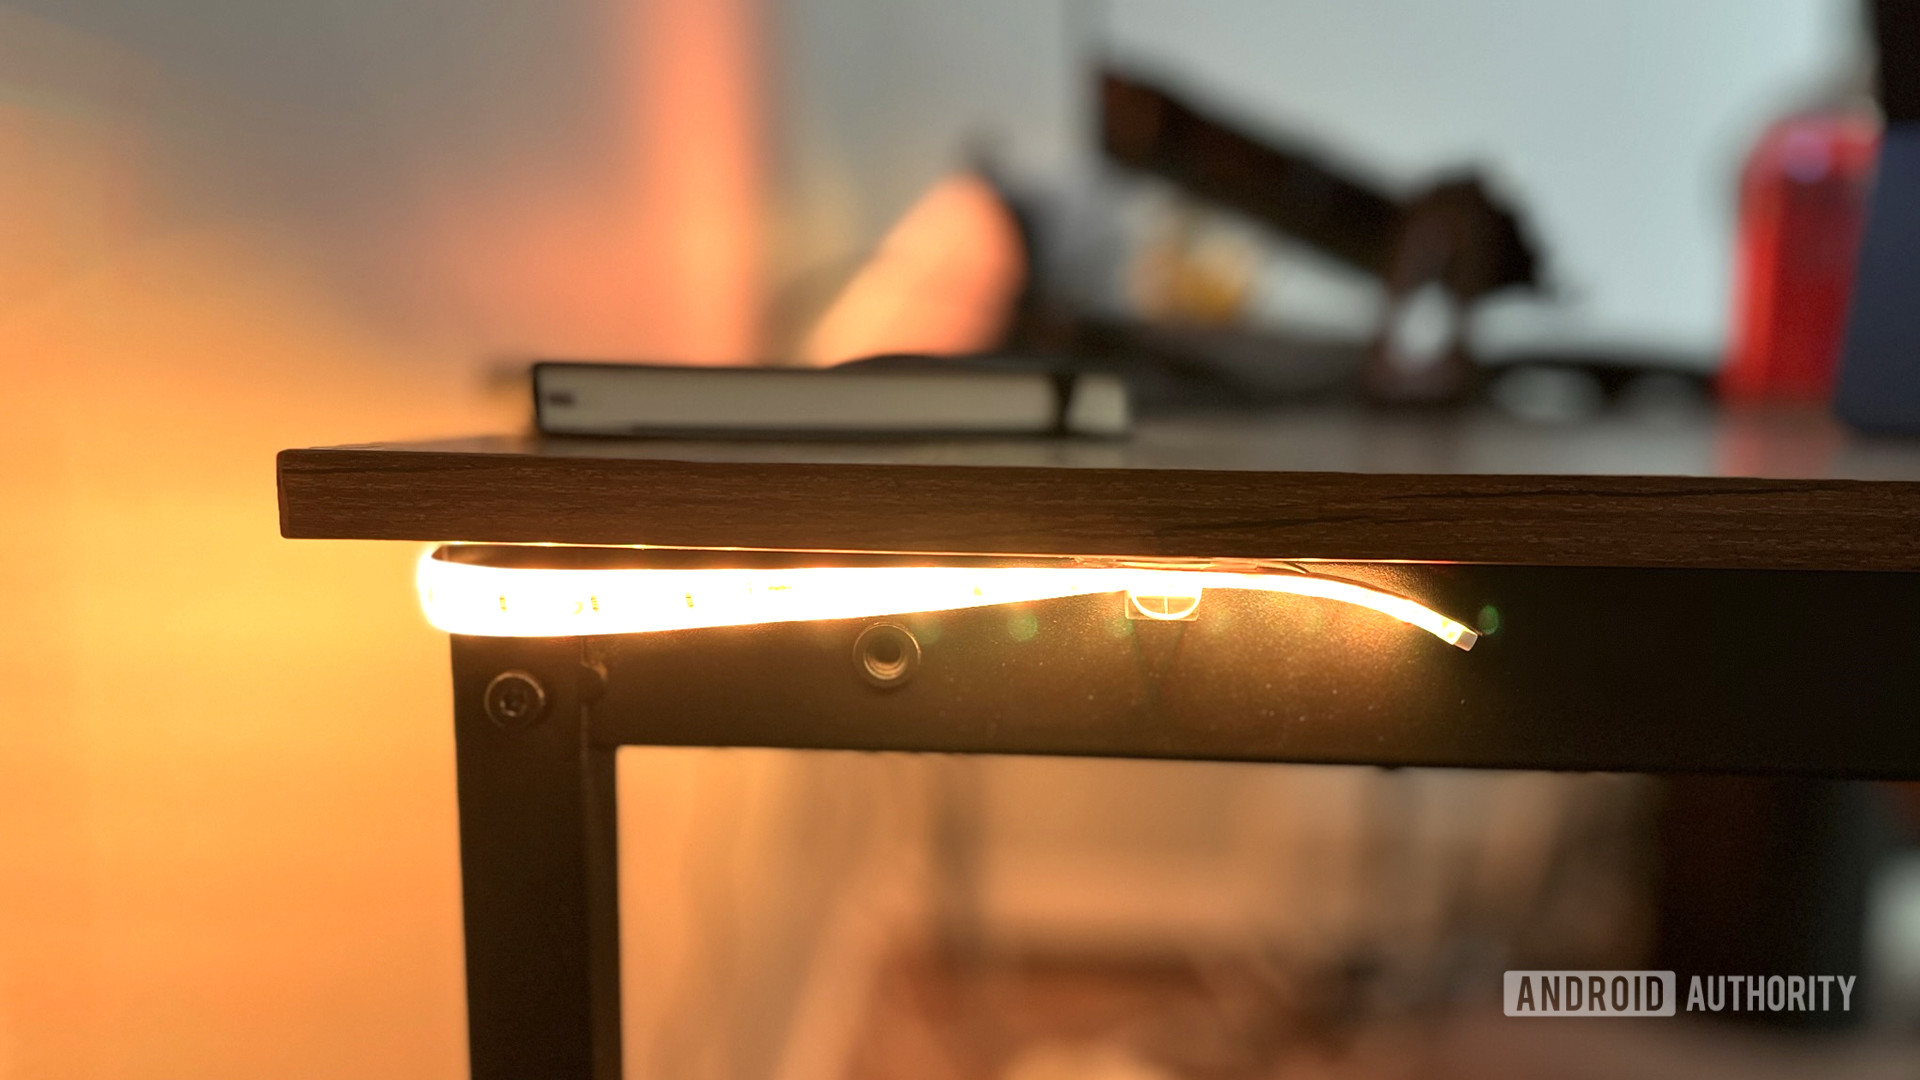 The Govee M1 Lightstrip mounted on a desk